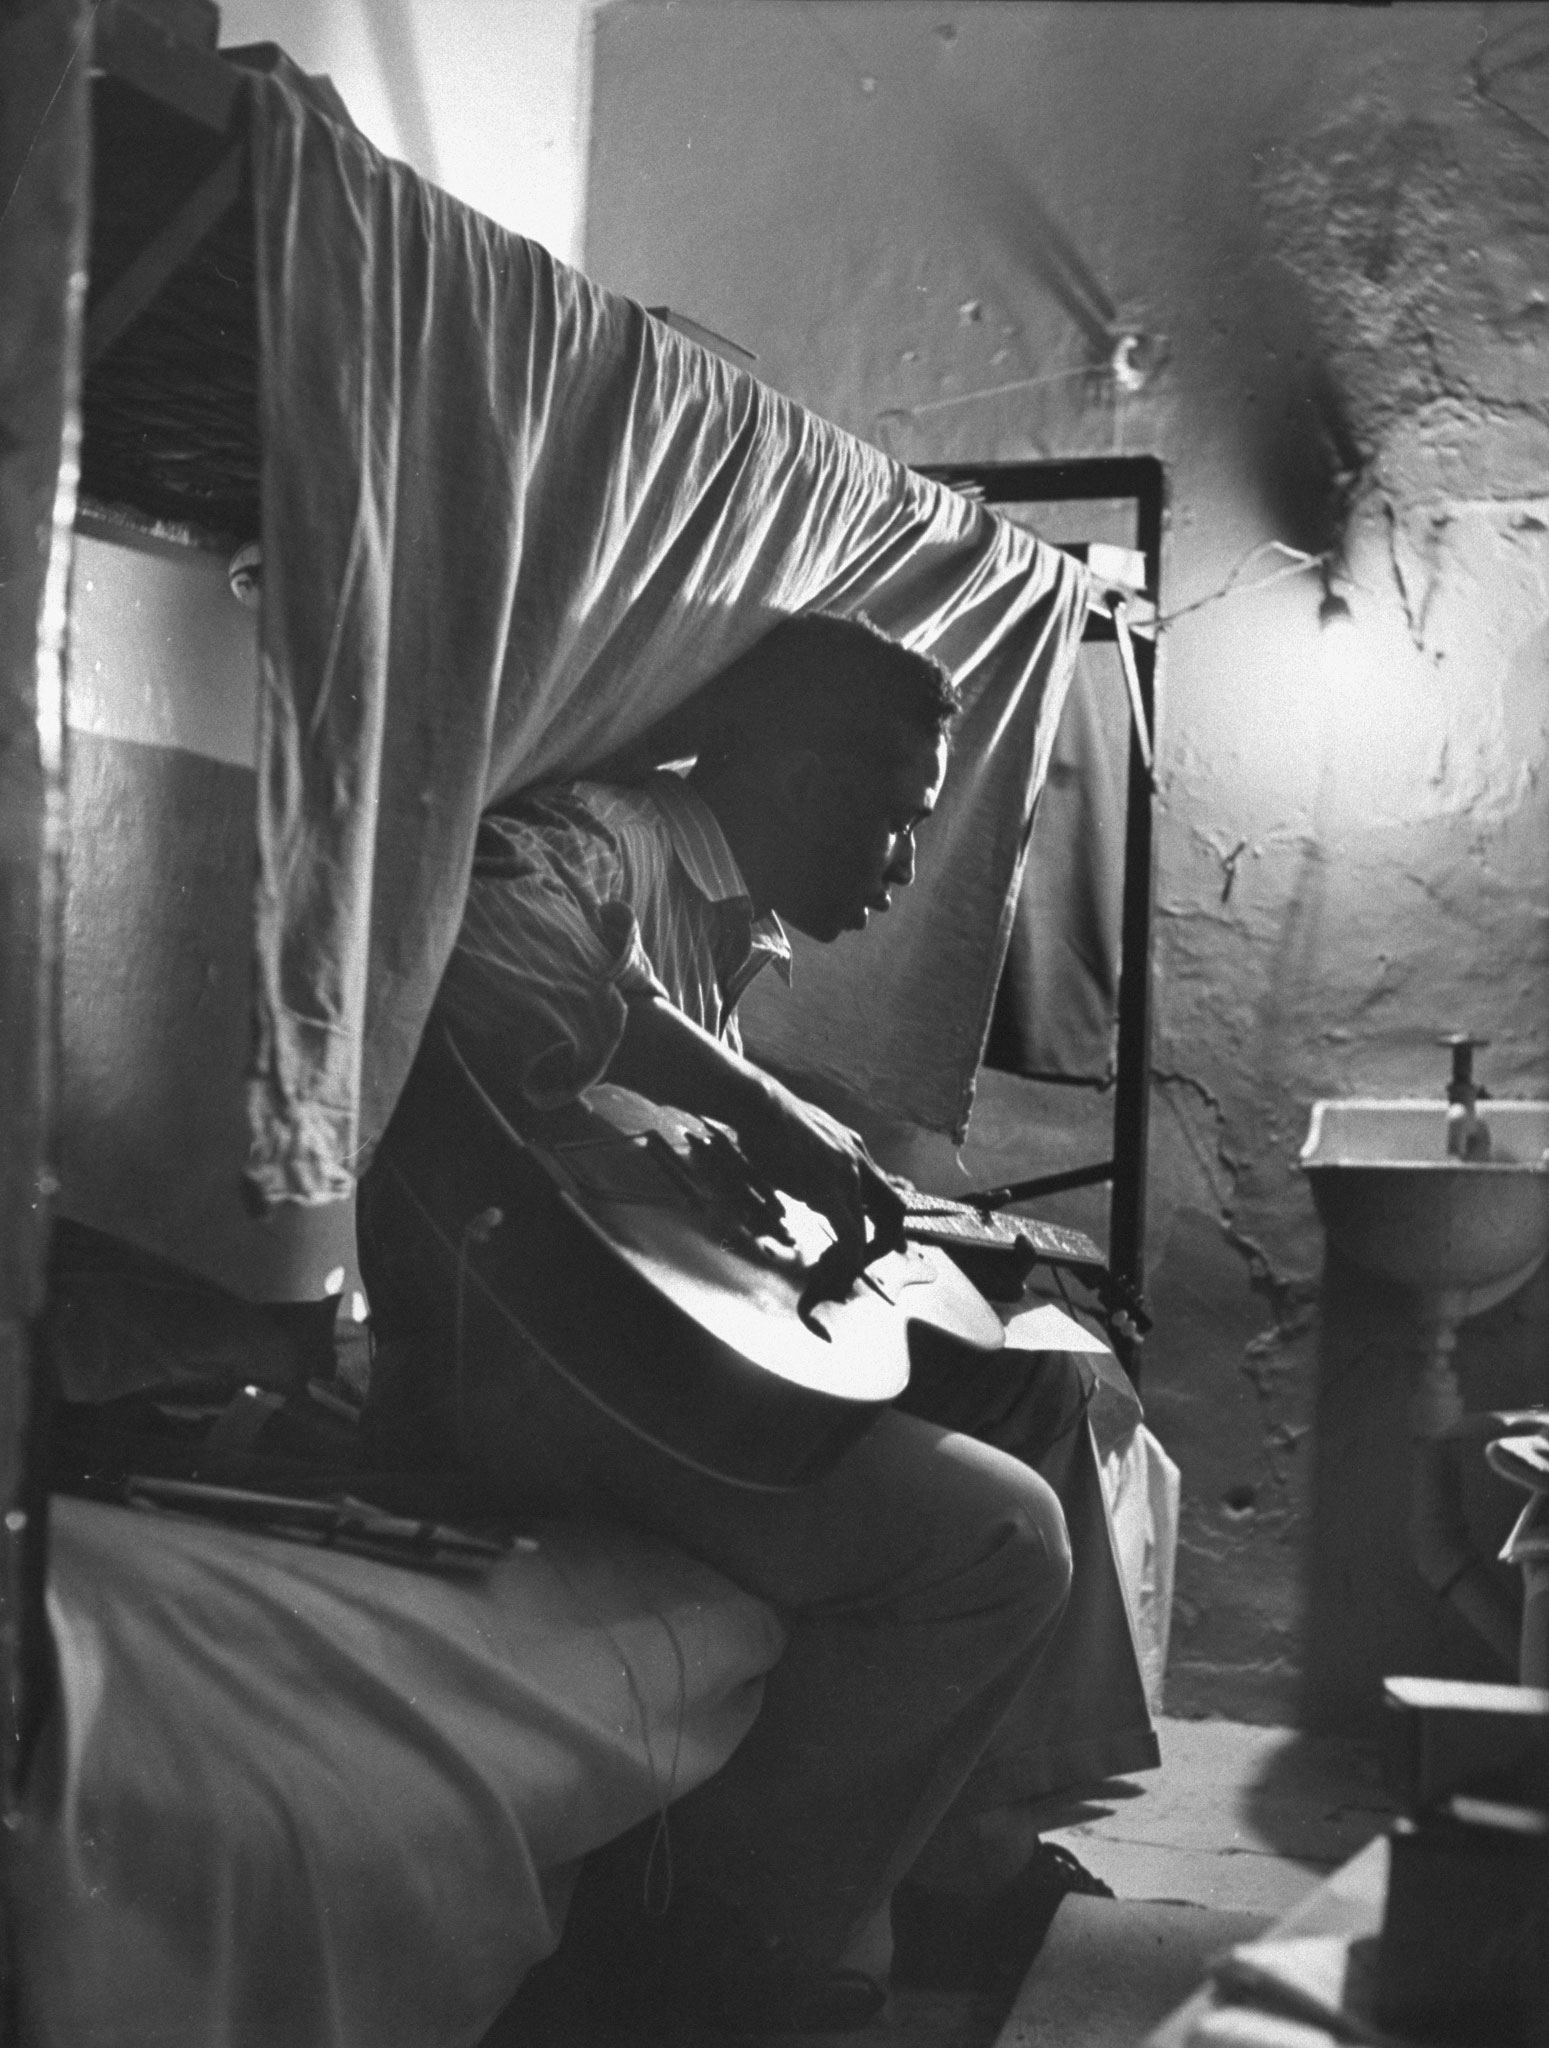 Robert Riley, serving 10 to 16 years for housebreaking, sits in his cell composing music, Tennessee State Penitentiary, 1953. Riley co-wrote the hit song, "Just Walkin' in the Rain."